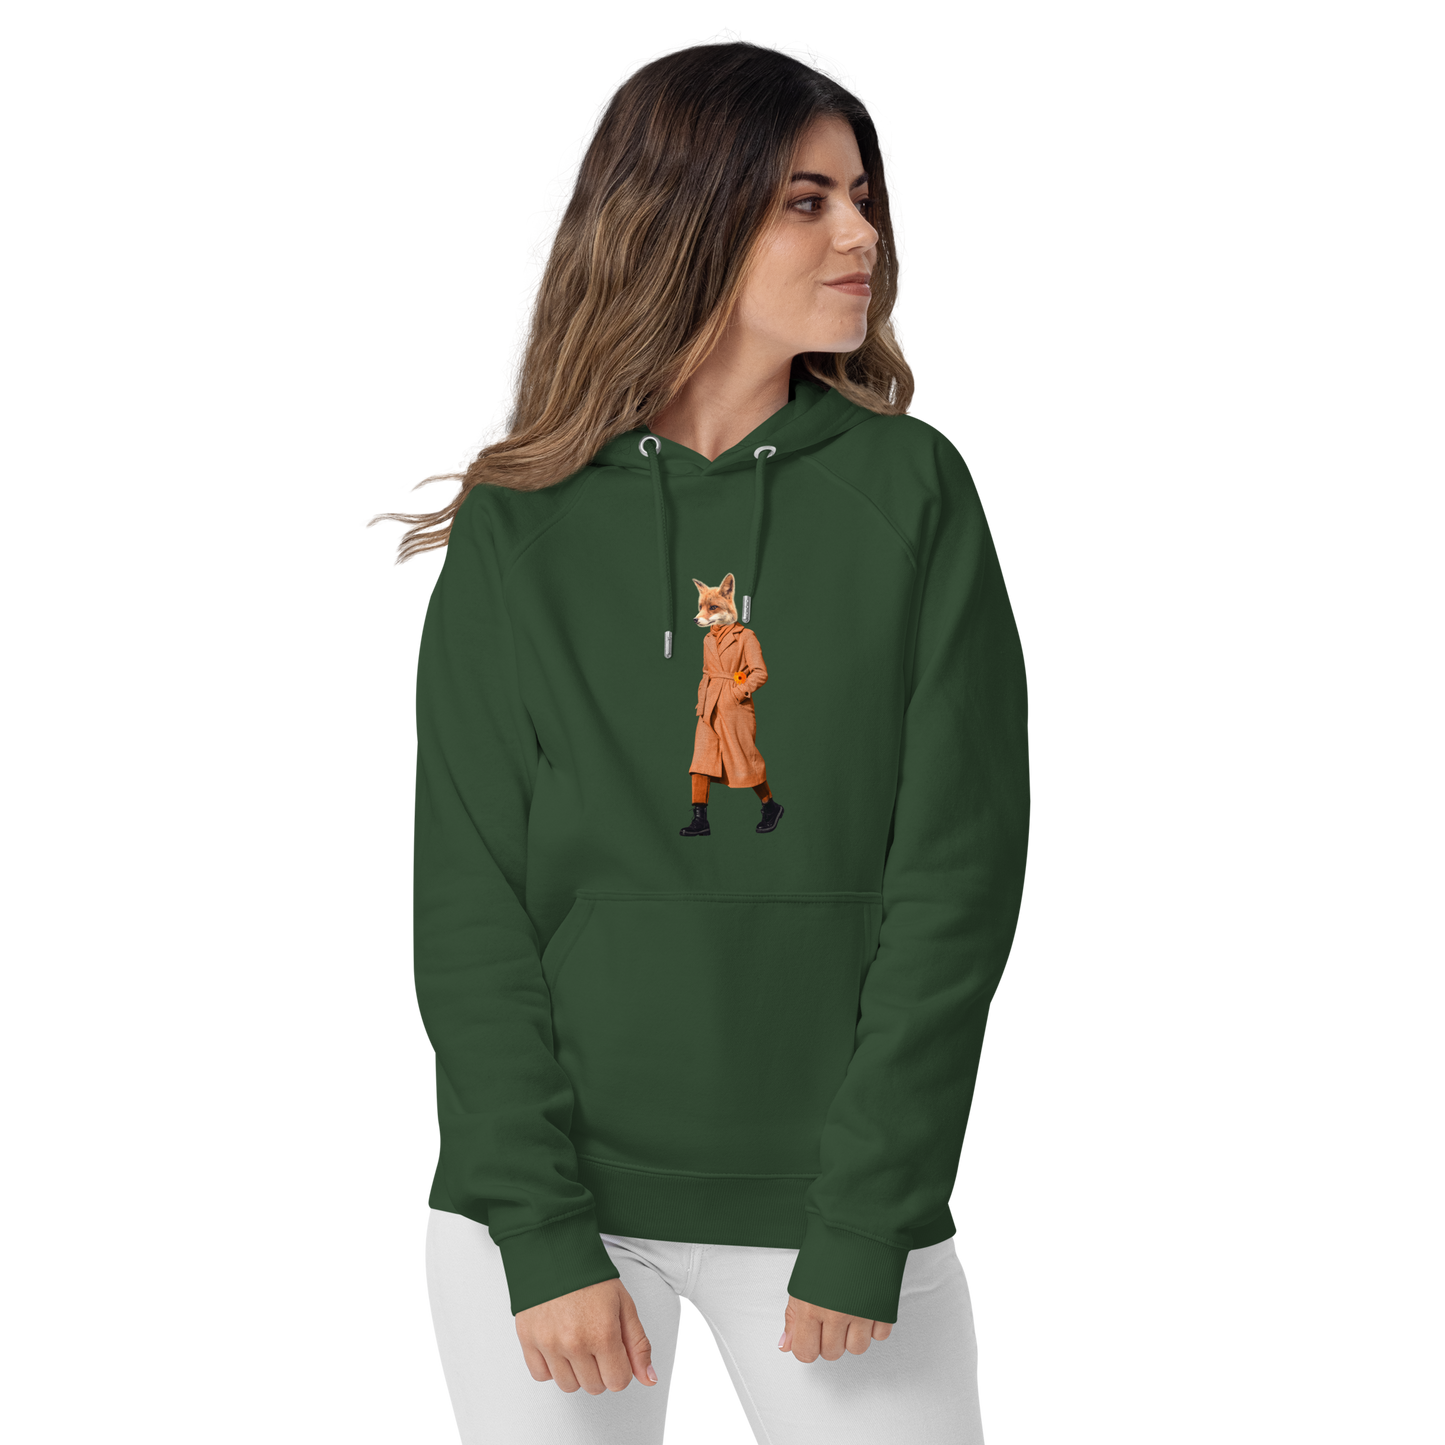 Woman Wearing a Bottle Green Anthropomorphic Fox Raglan Hoodie featuring a sly Anthropomorphic Fox in a Trench Coat graphic on the chest - Funny Graphic Fox Hoodies - Boozy Fox